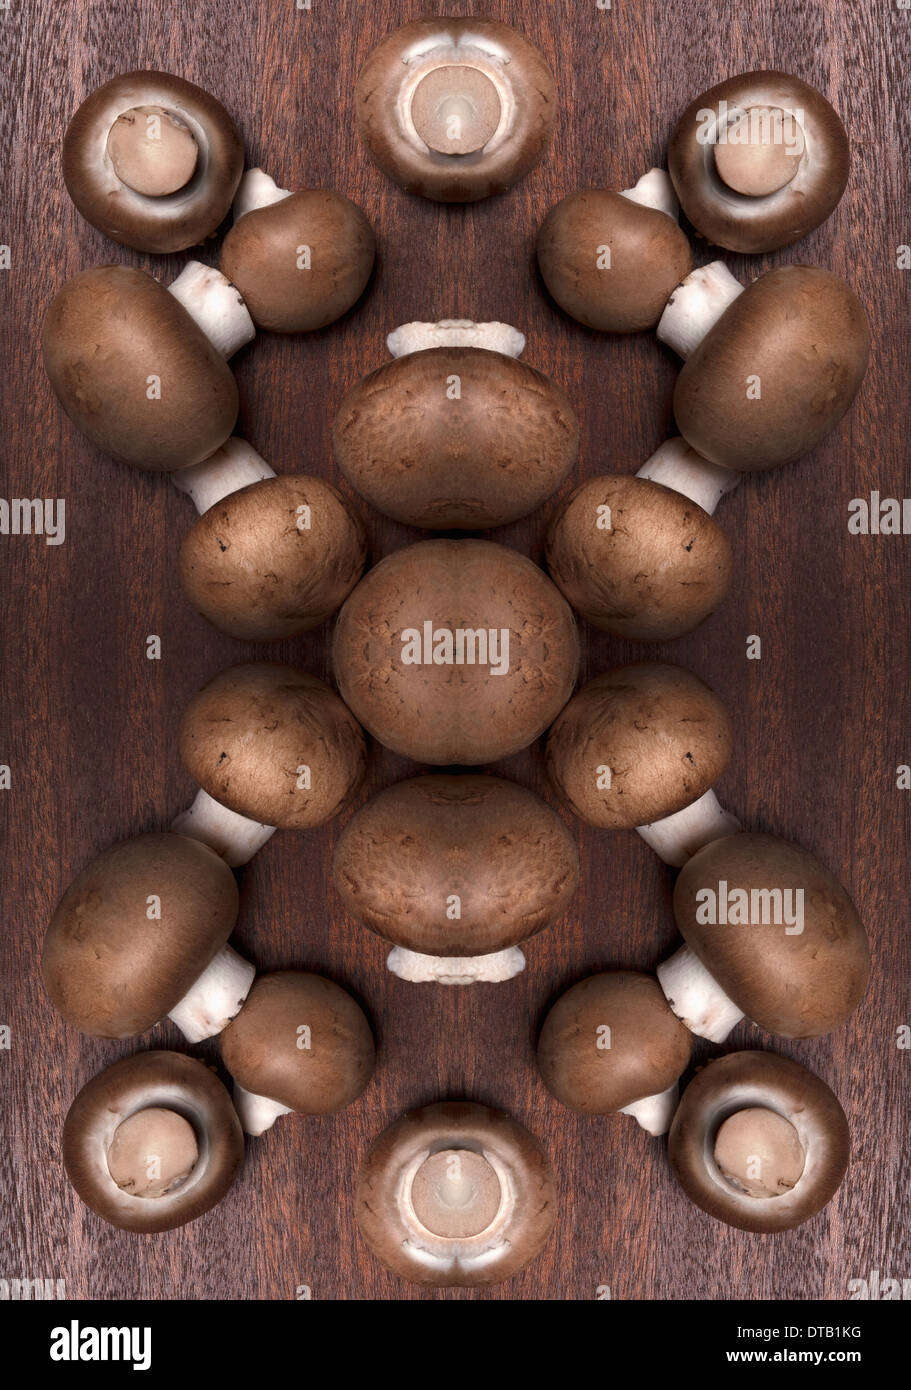 A digital composite of mirrored images of an arrangement of mushrooms Stock Photo